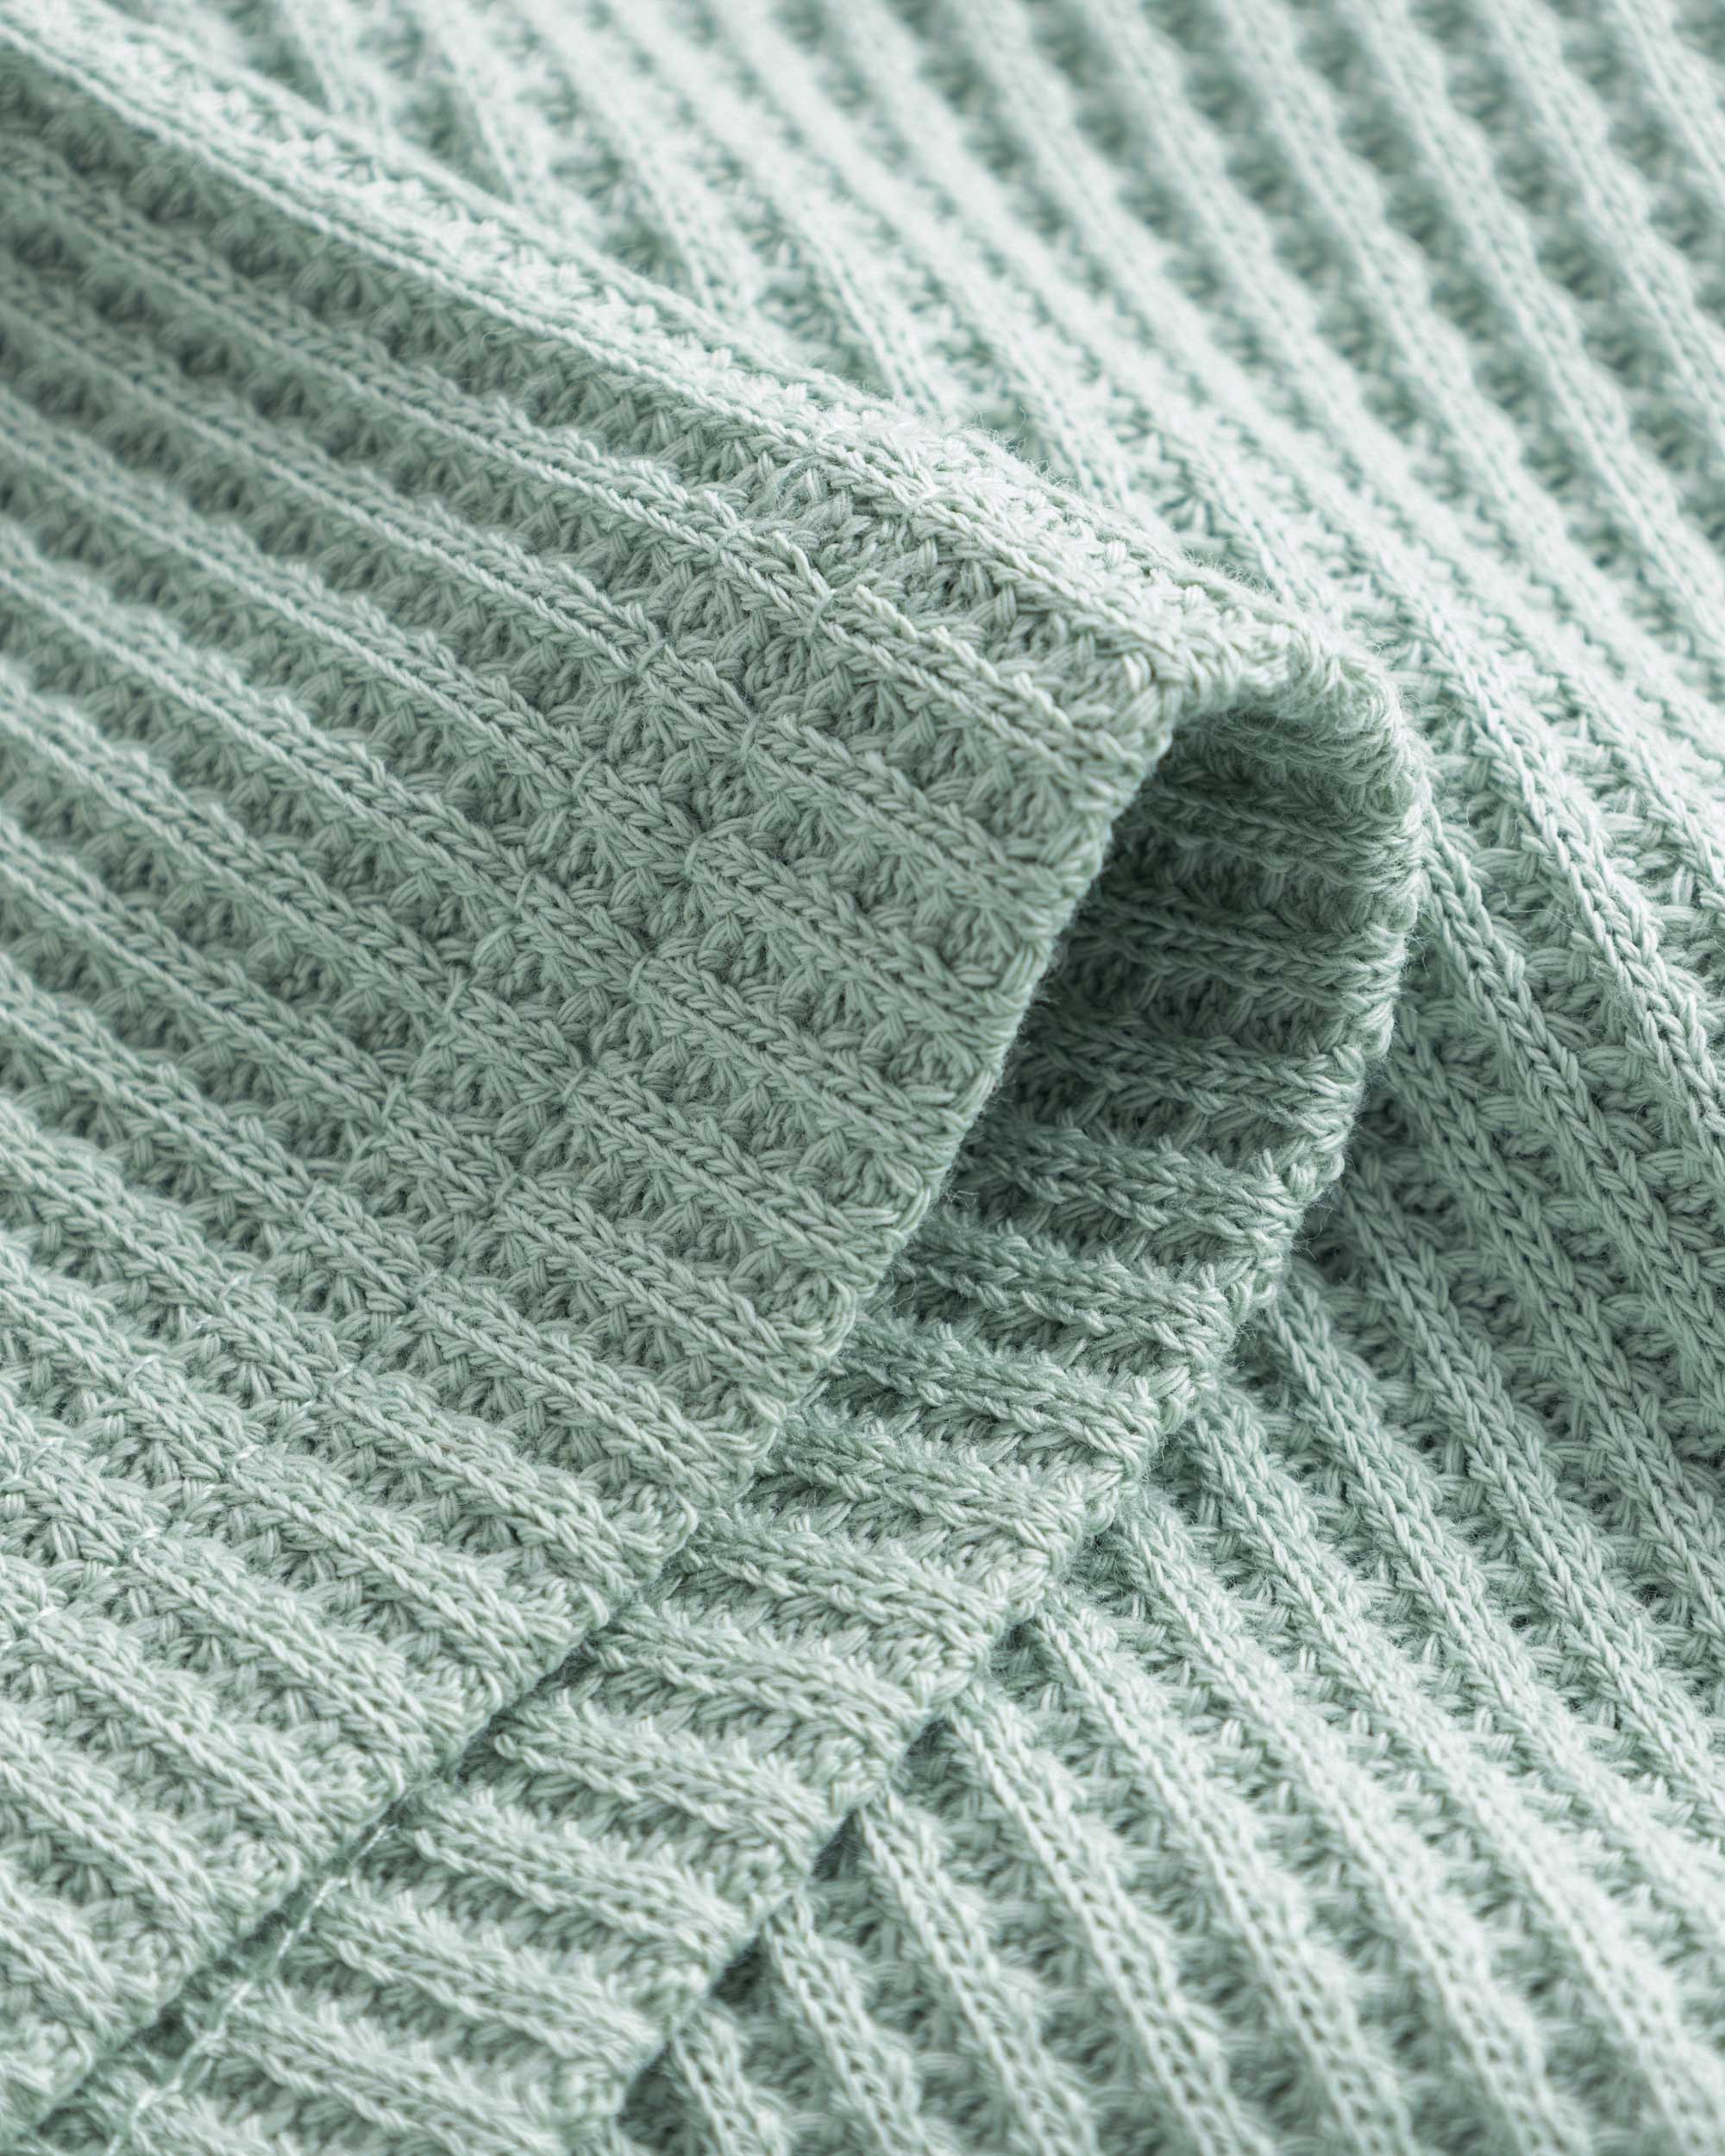 Close-up of stitchings and sleeve on a mint green waffle-patterned shirt.